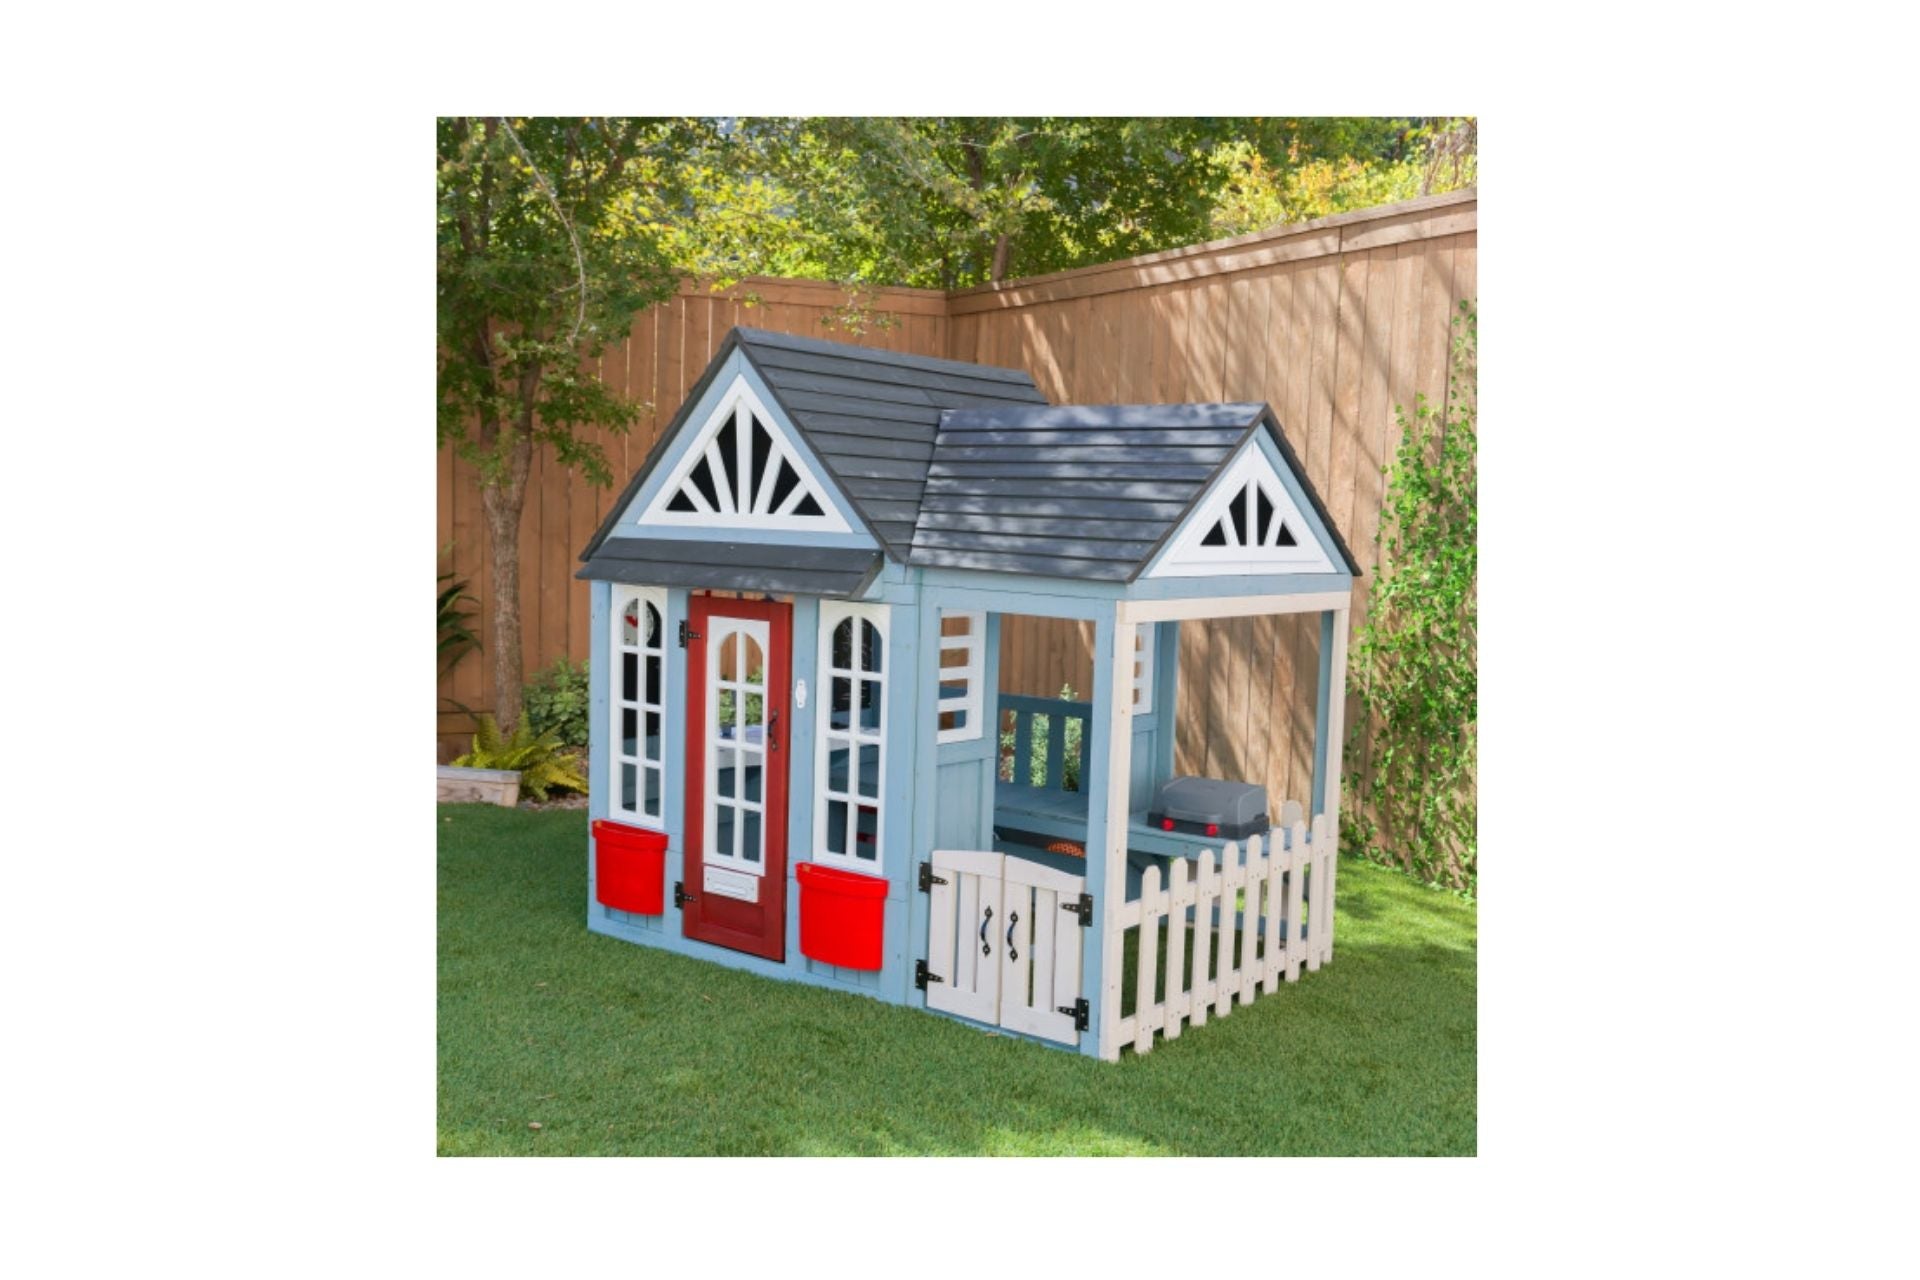 Timber Trail Wooden Outdoor Playhouse